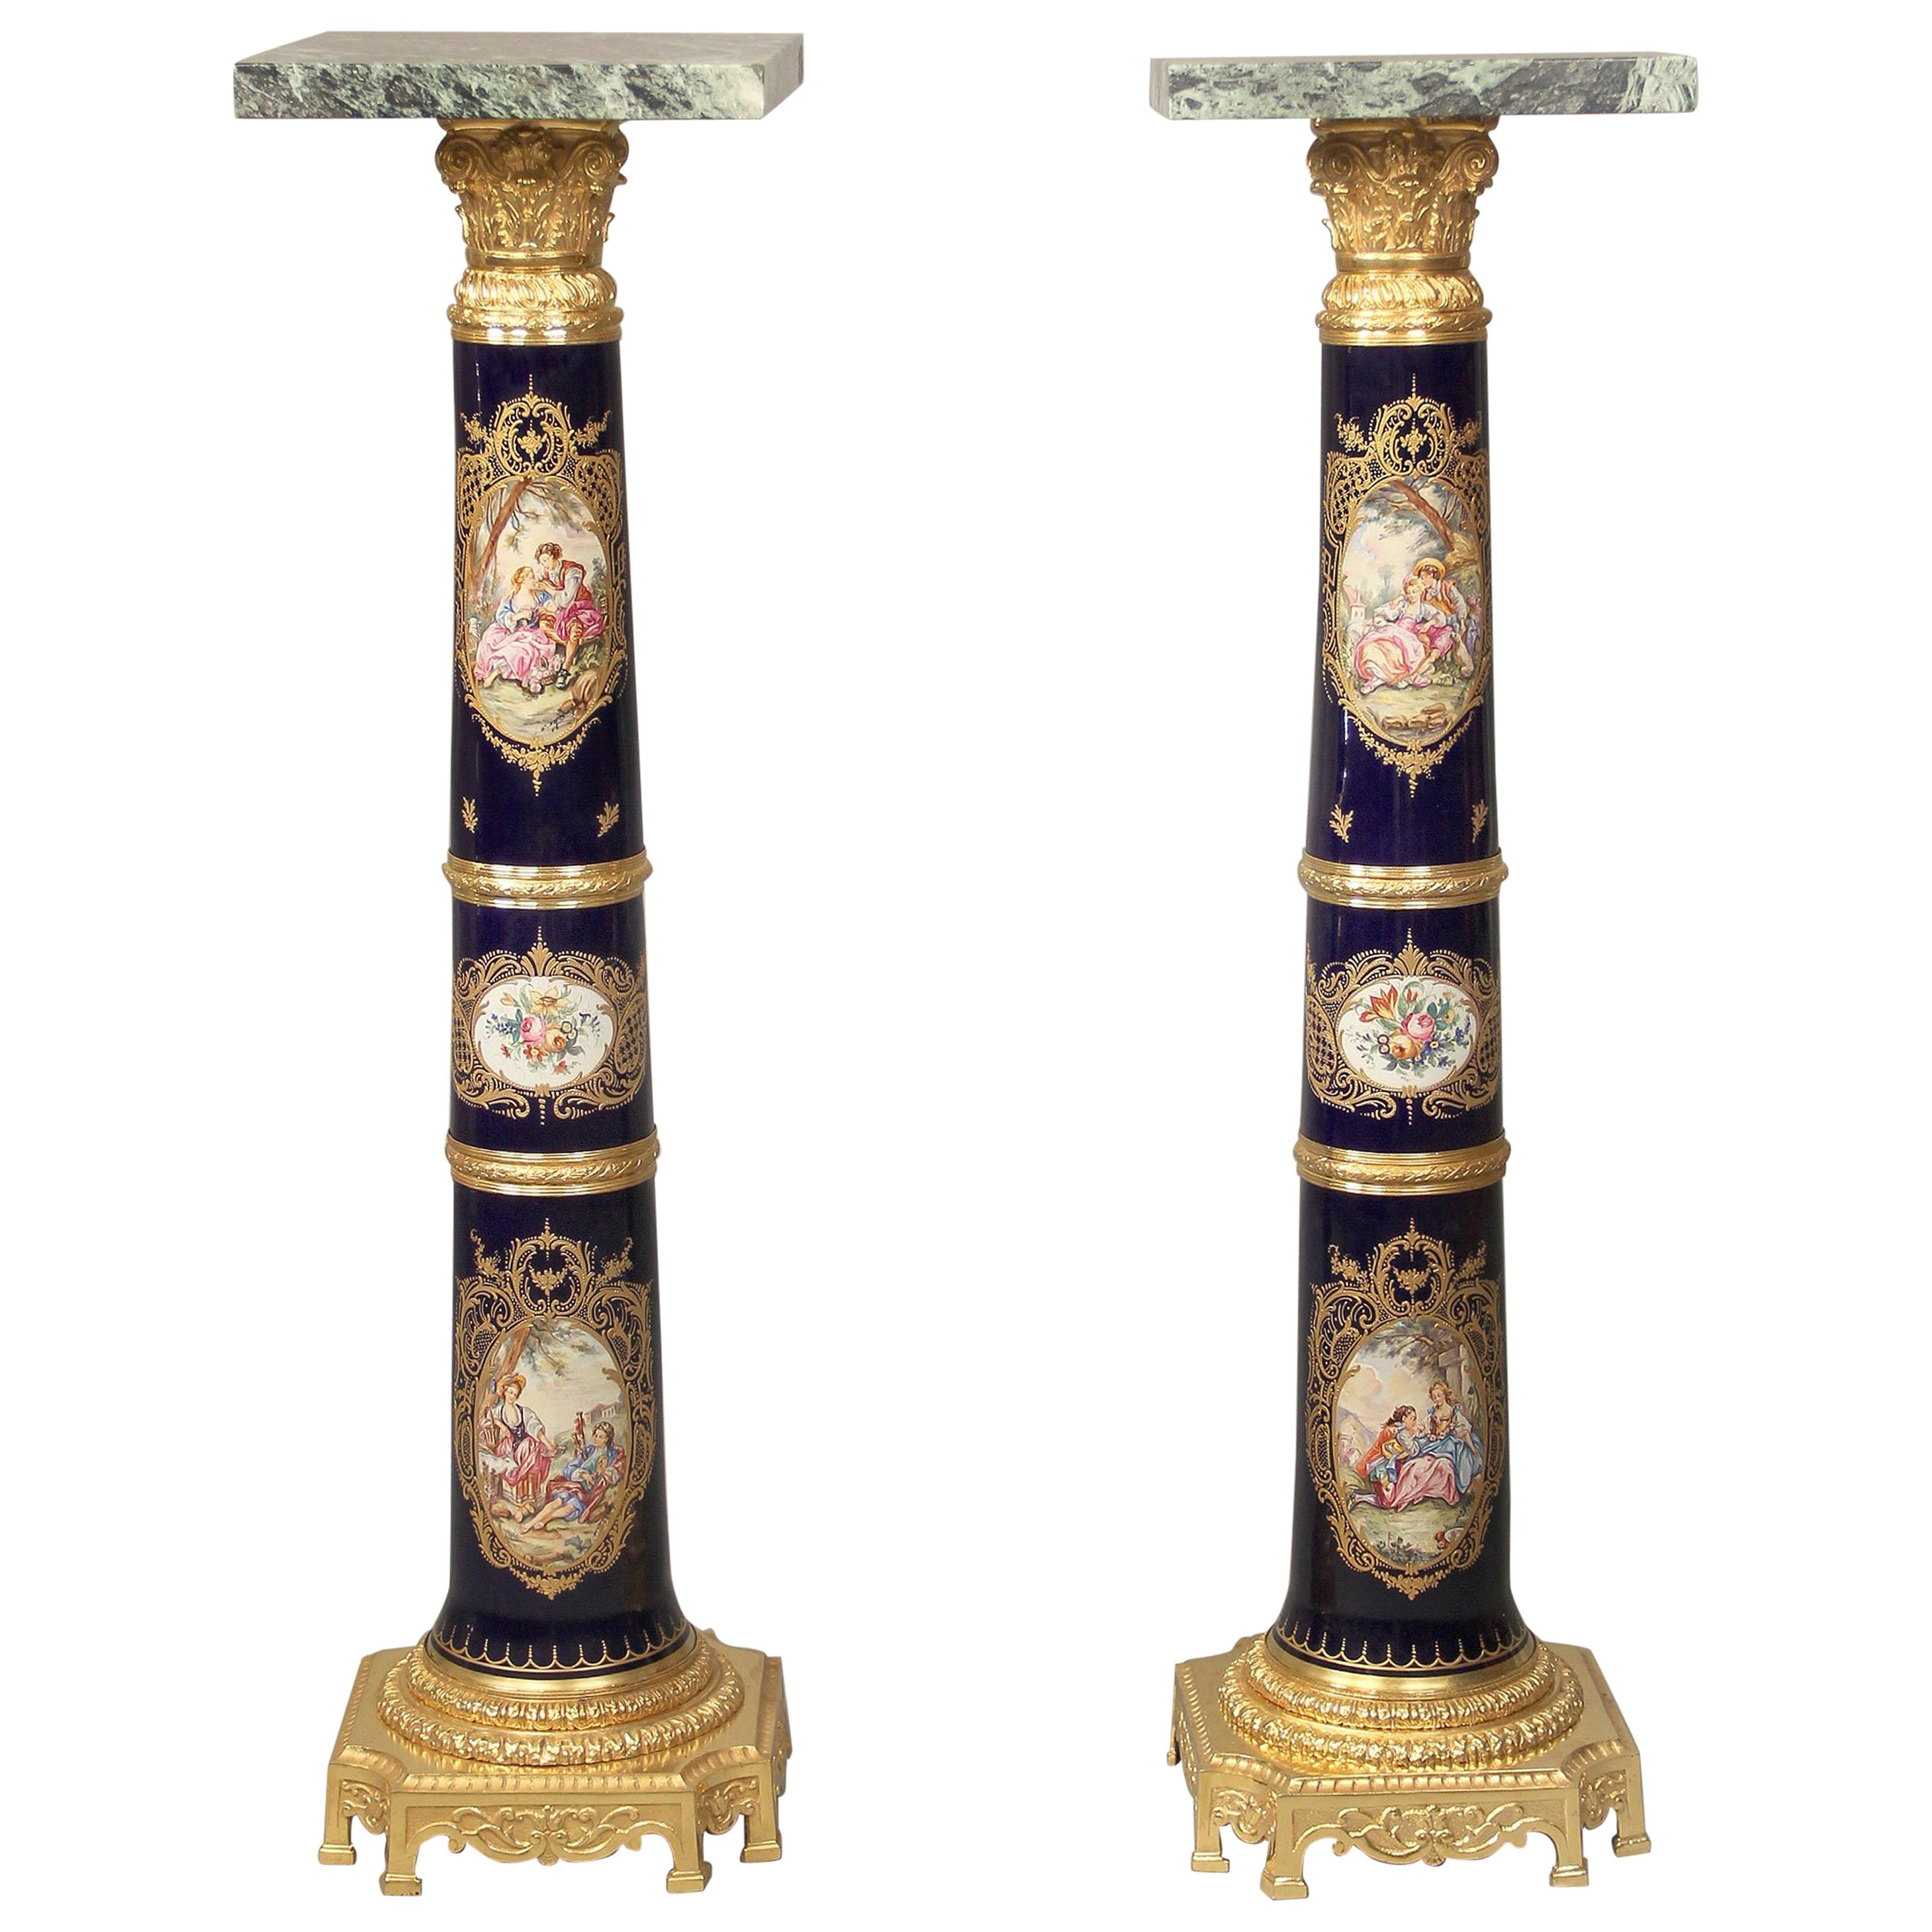 Pair of Late 19th Century Gilt Bronze-Mounted Sèvres Style Pedestals For Sale